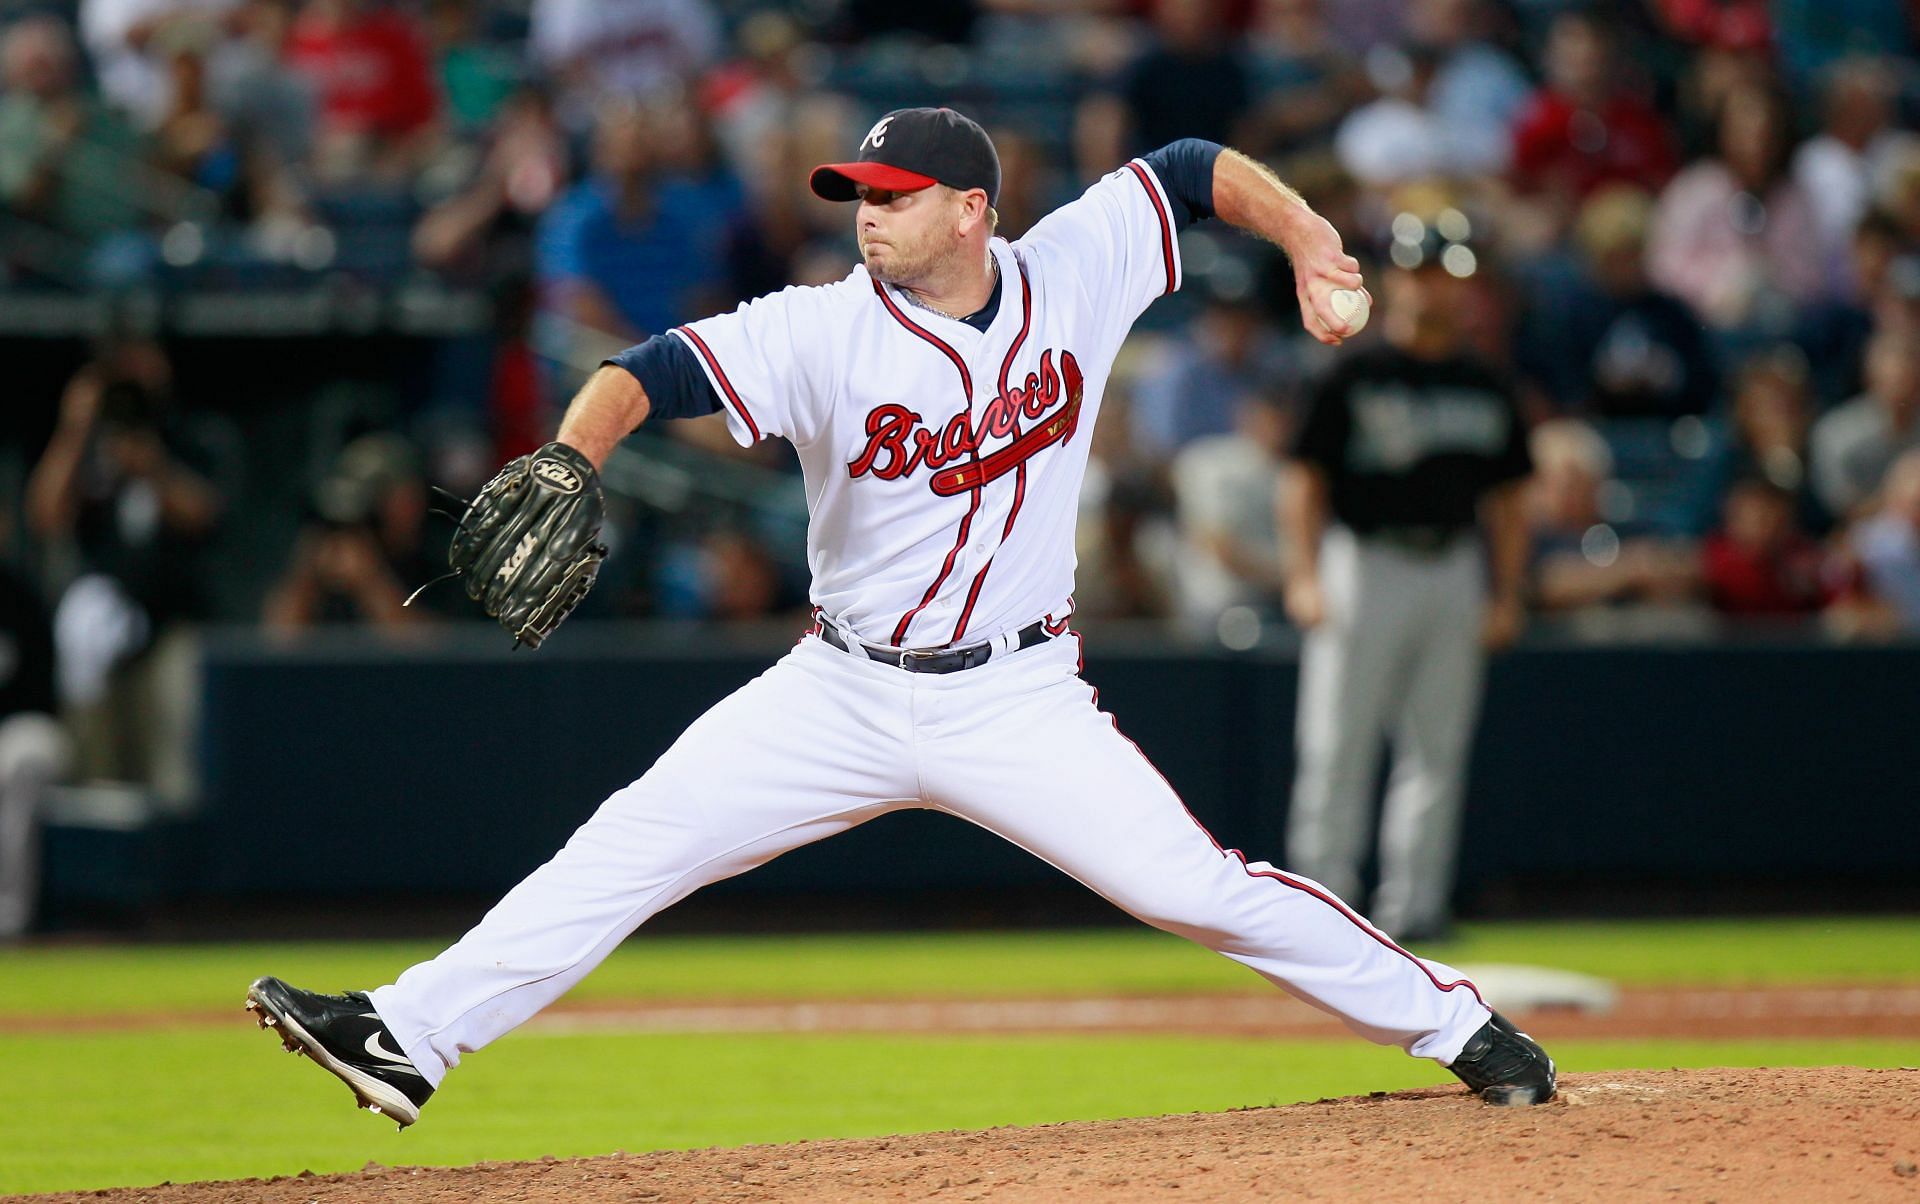 ALL-STAR CLOSER BILLY WAGNER TO BE GUEST OF HONOR AT RADFORD'S FIRST PITCH  DINNER - Radford University Athletics